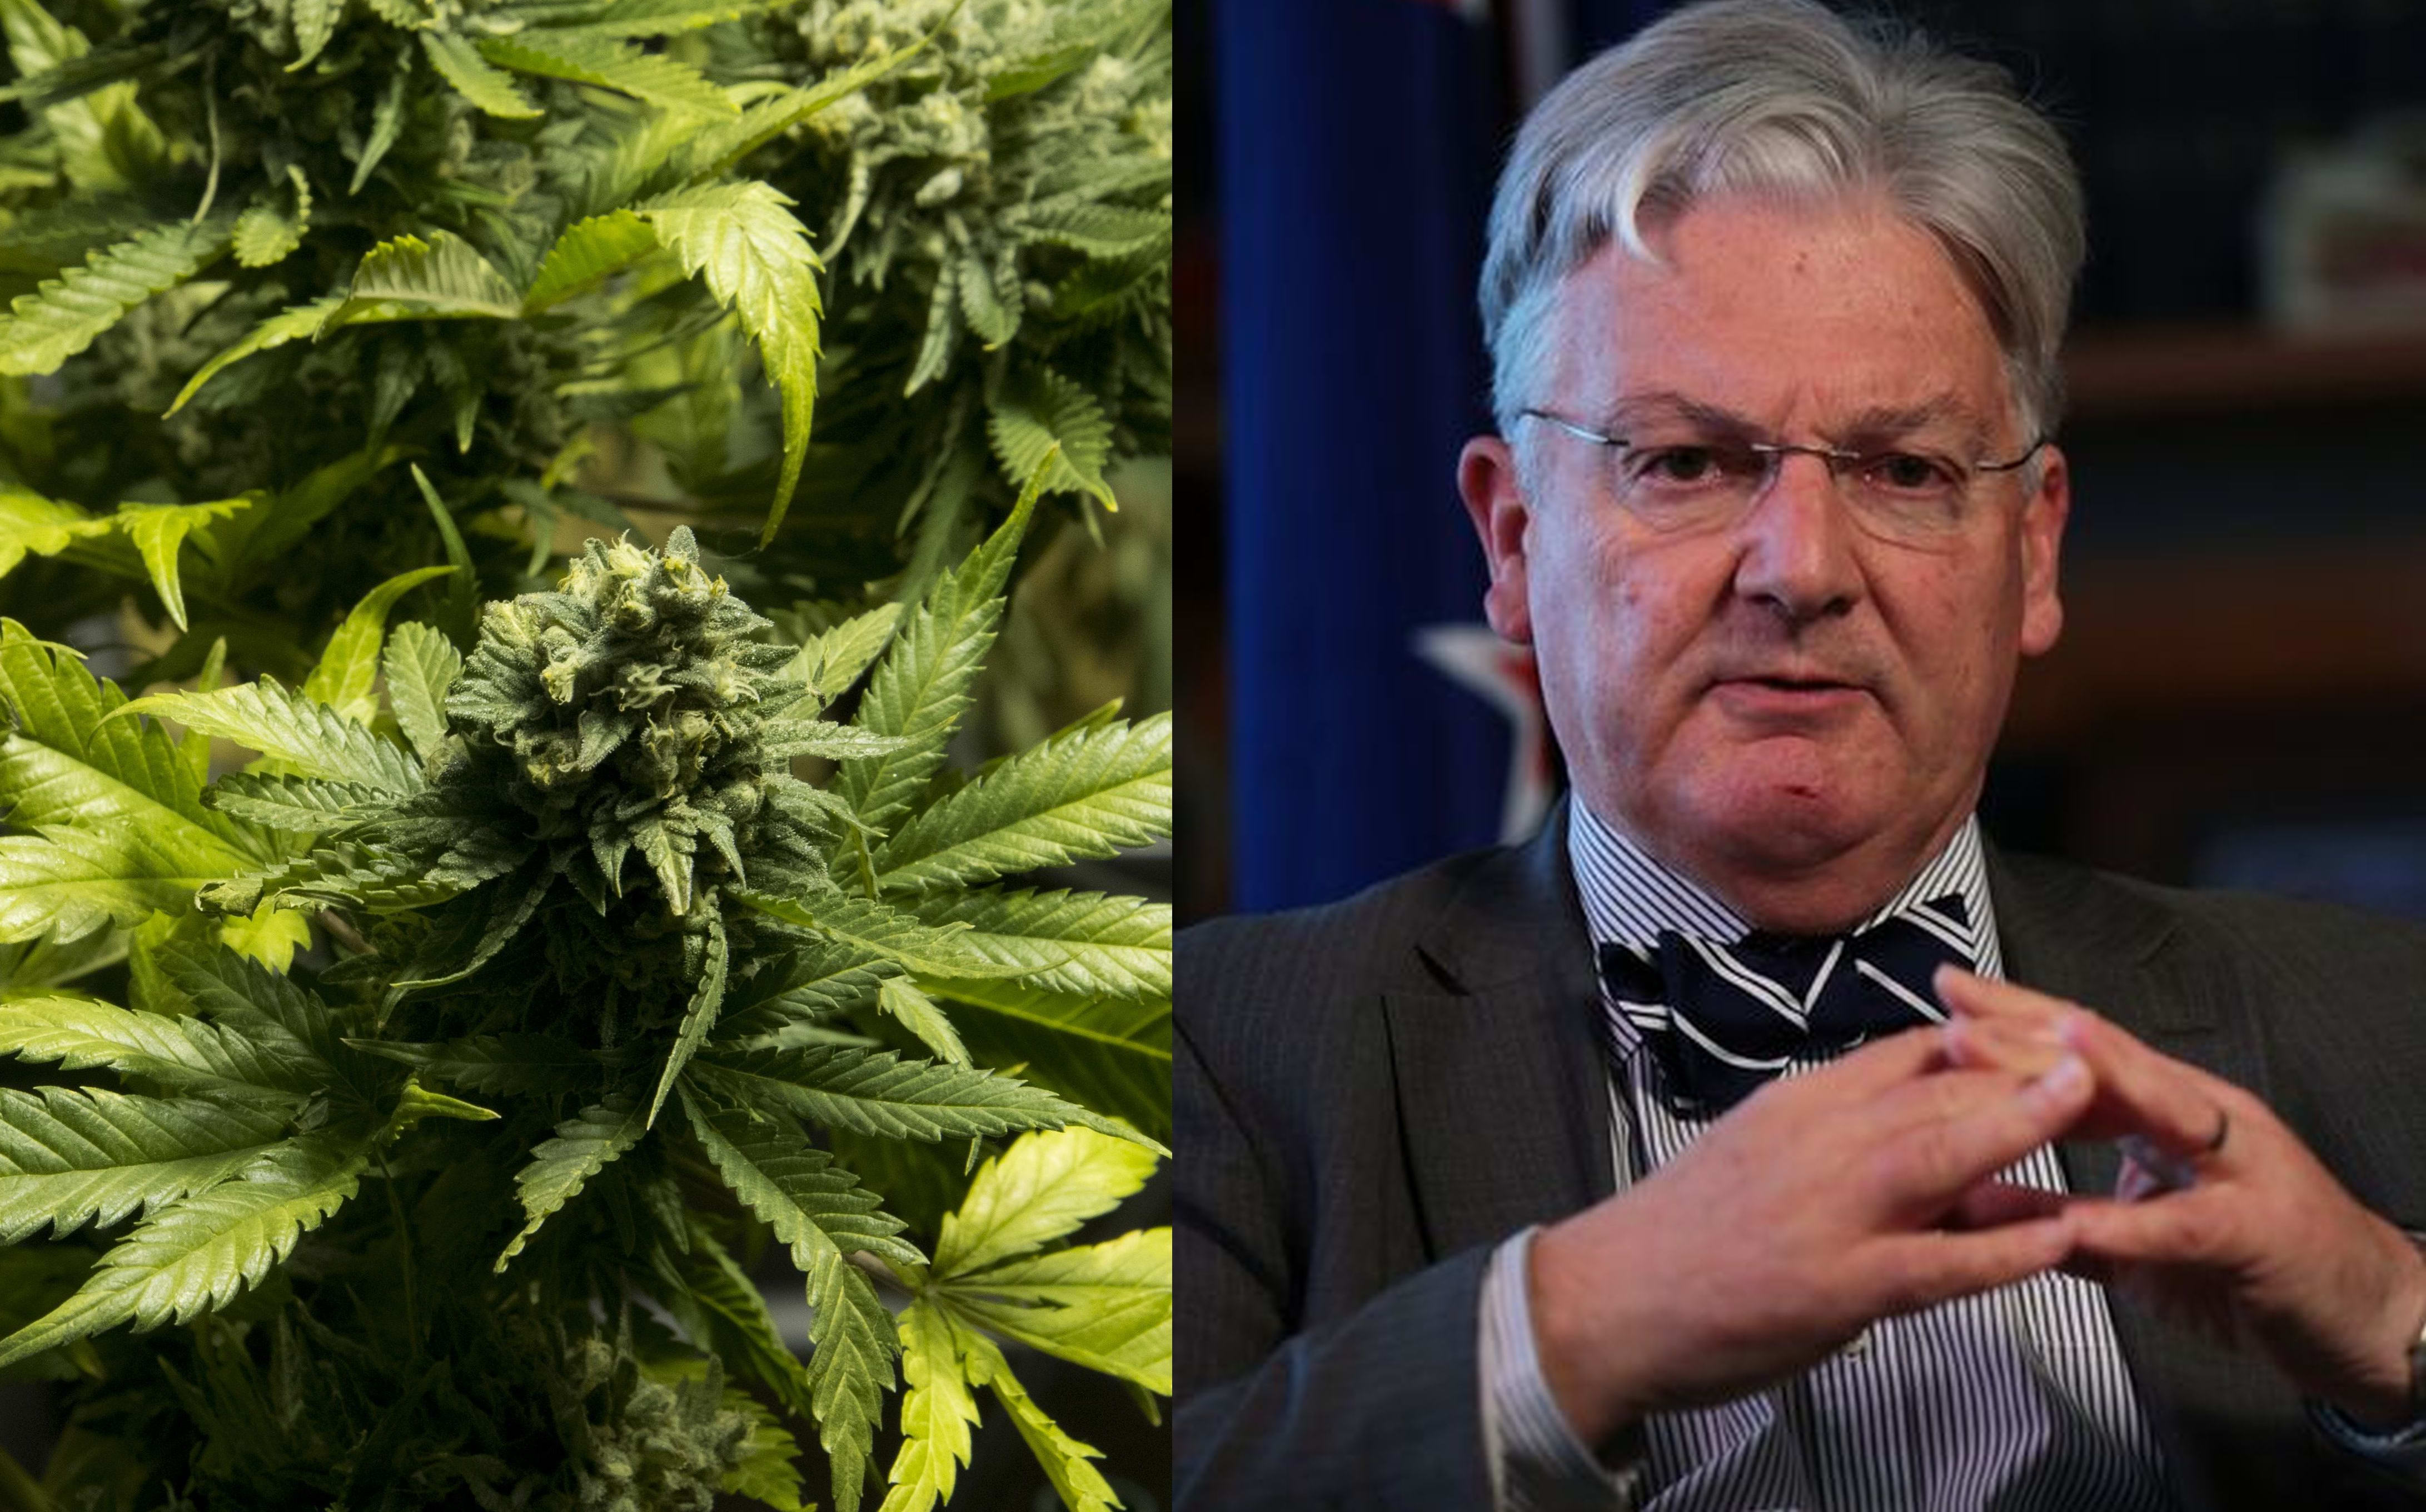 Peter Dunne says raw cannabis is not on the agenda for the current government.